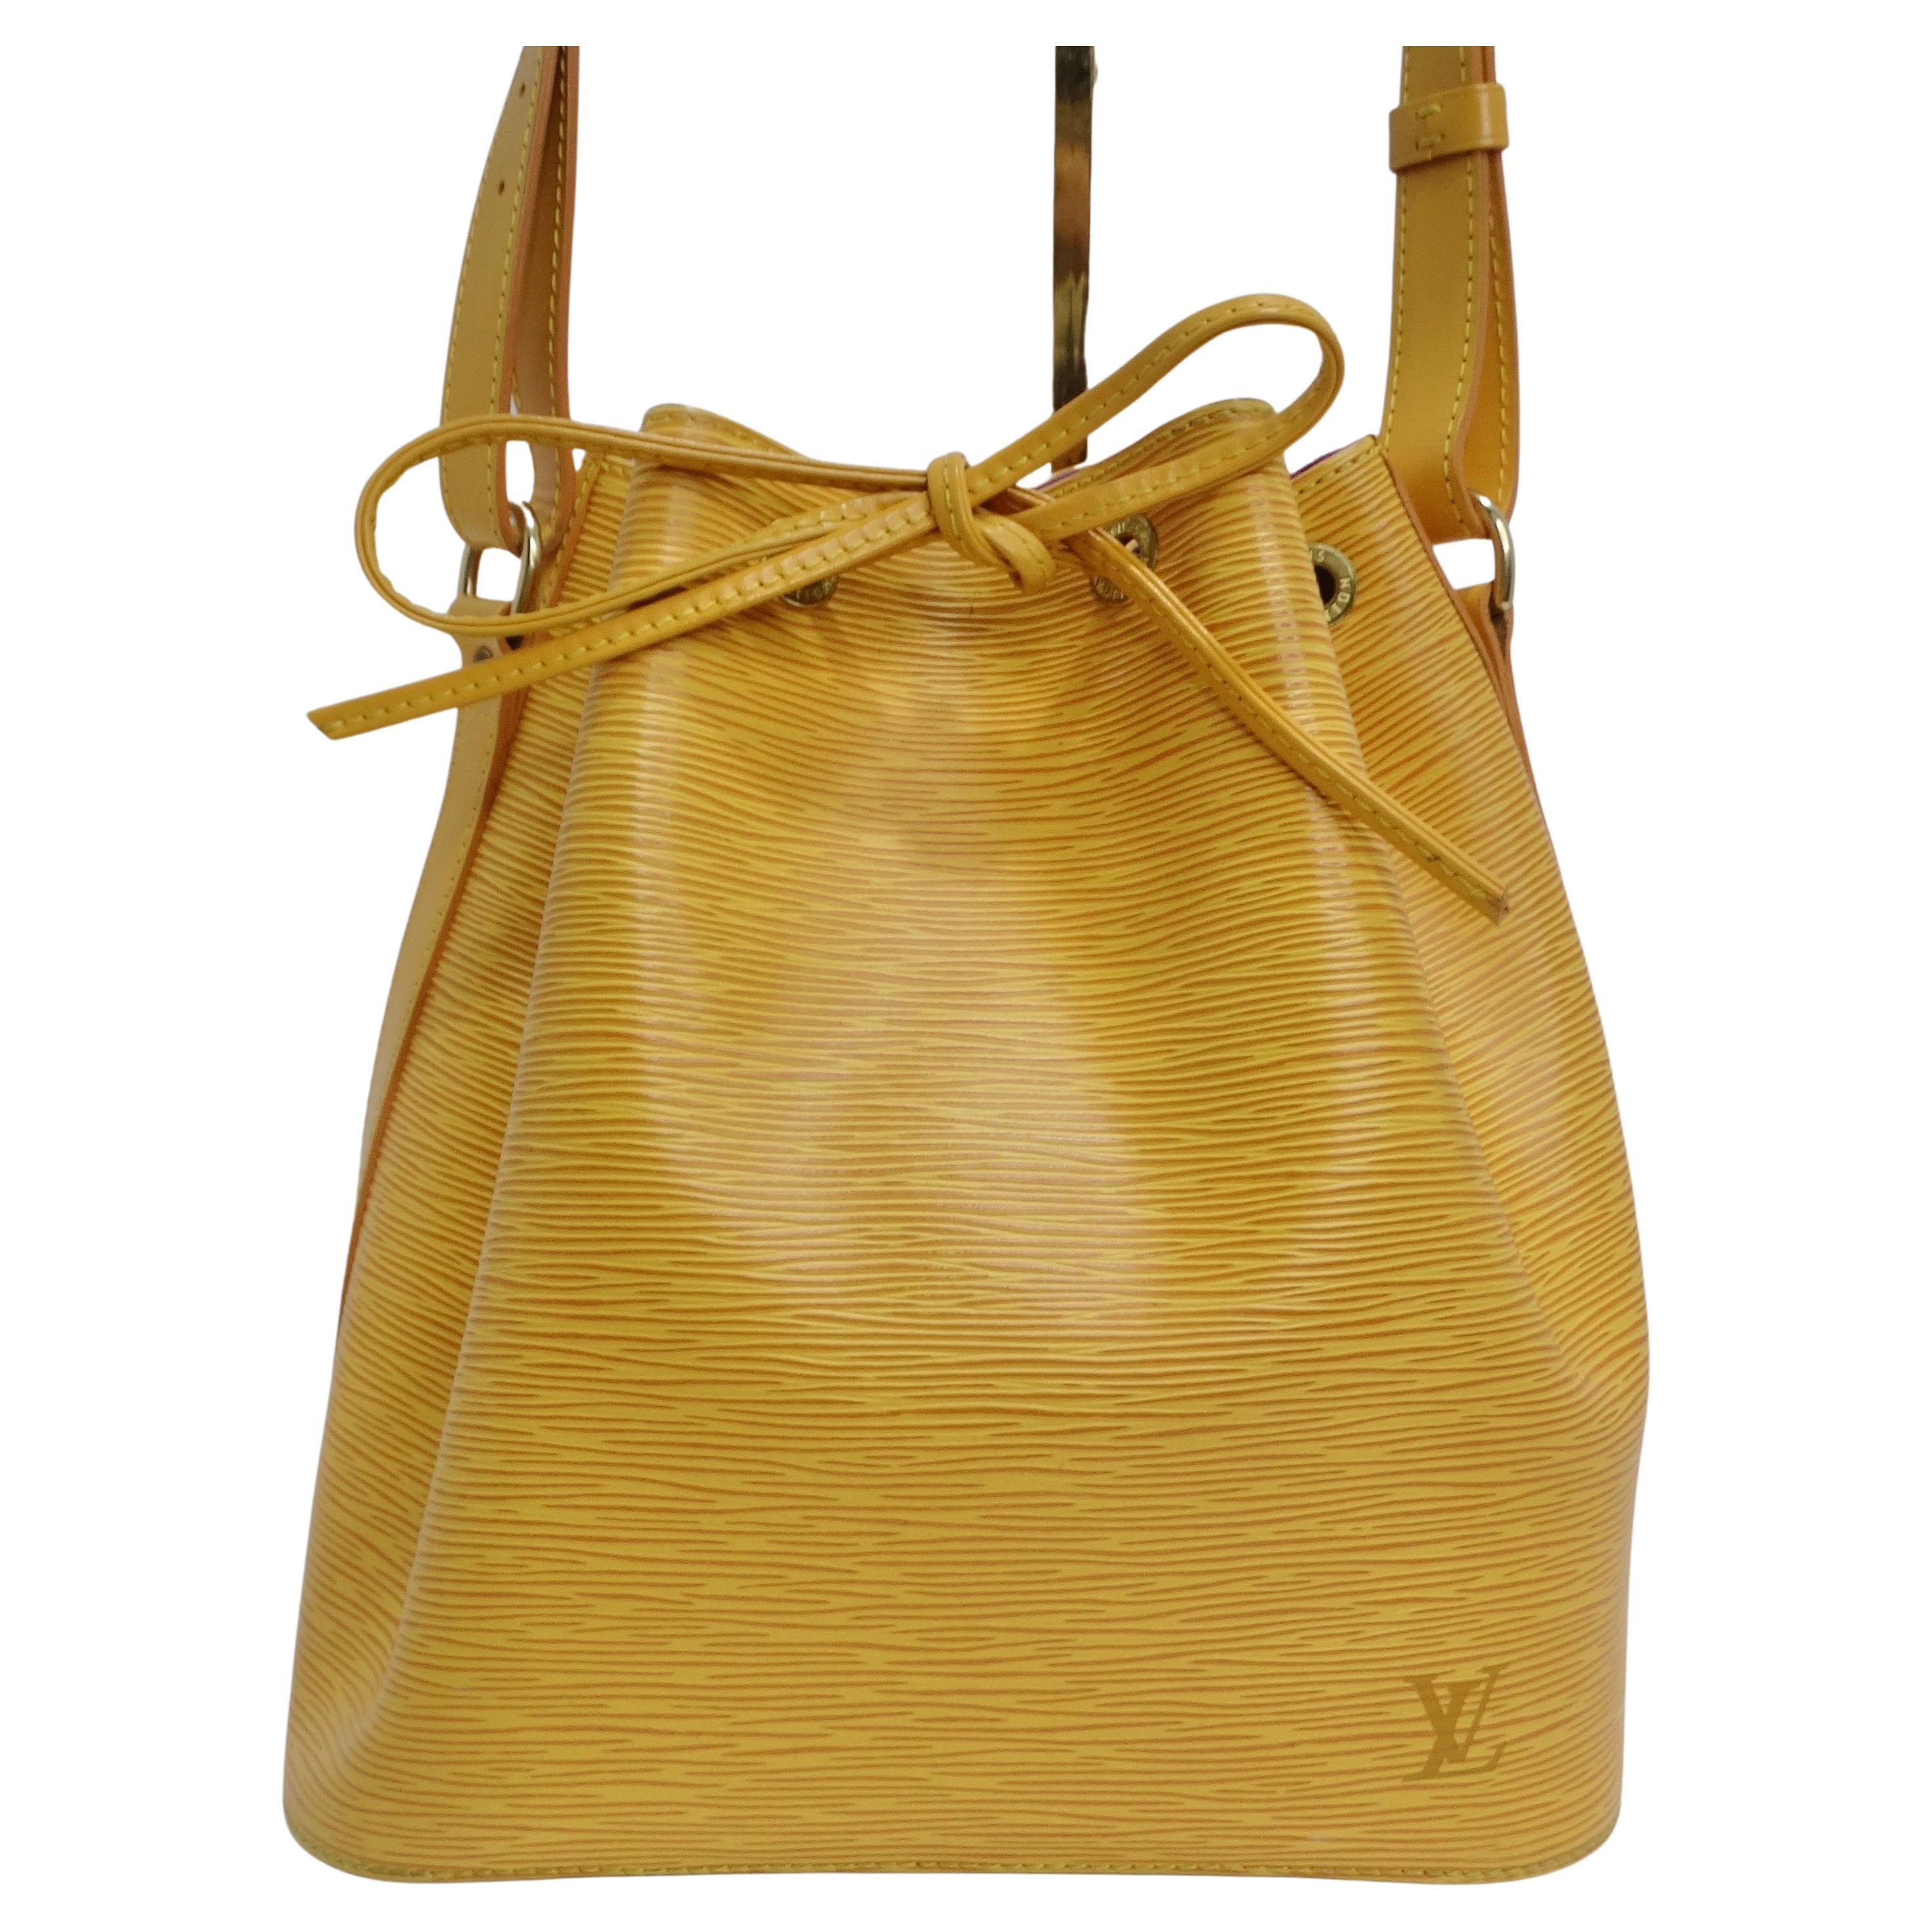 Introducing a timeless classic: the Louis Vuitton Epi Petite Noe Shoulder Bag. Crafted in the iconic textured Epi leather, this bag showcases a vibrant and sunny yellow hue that exudes elegance and style. The bucket-style drawstring design adds a